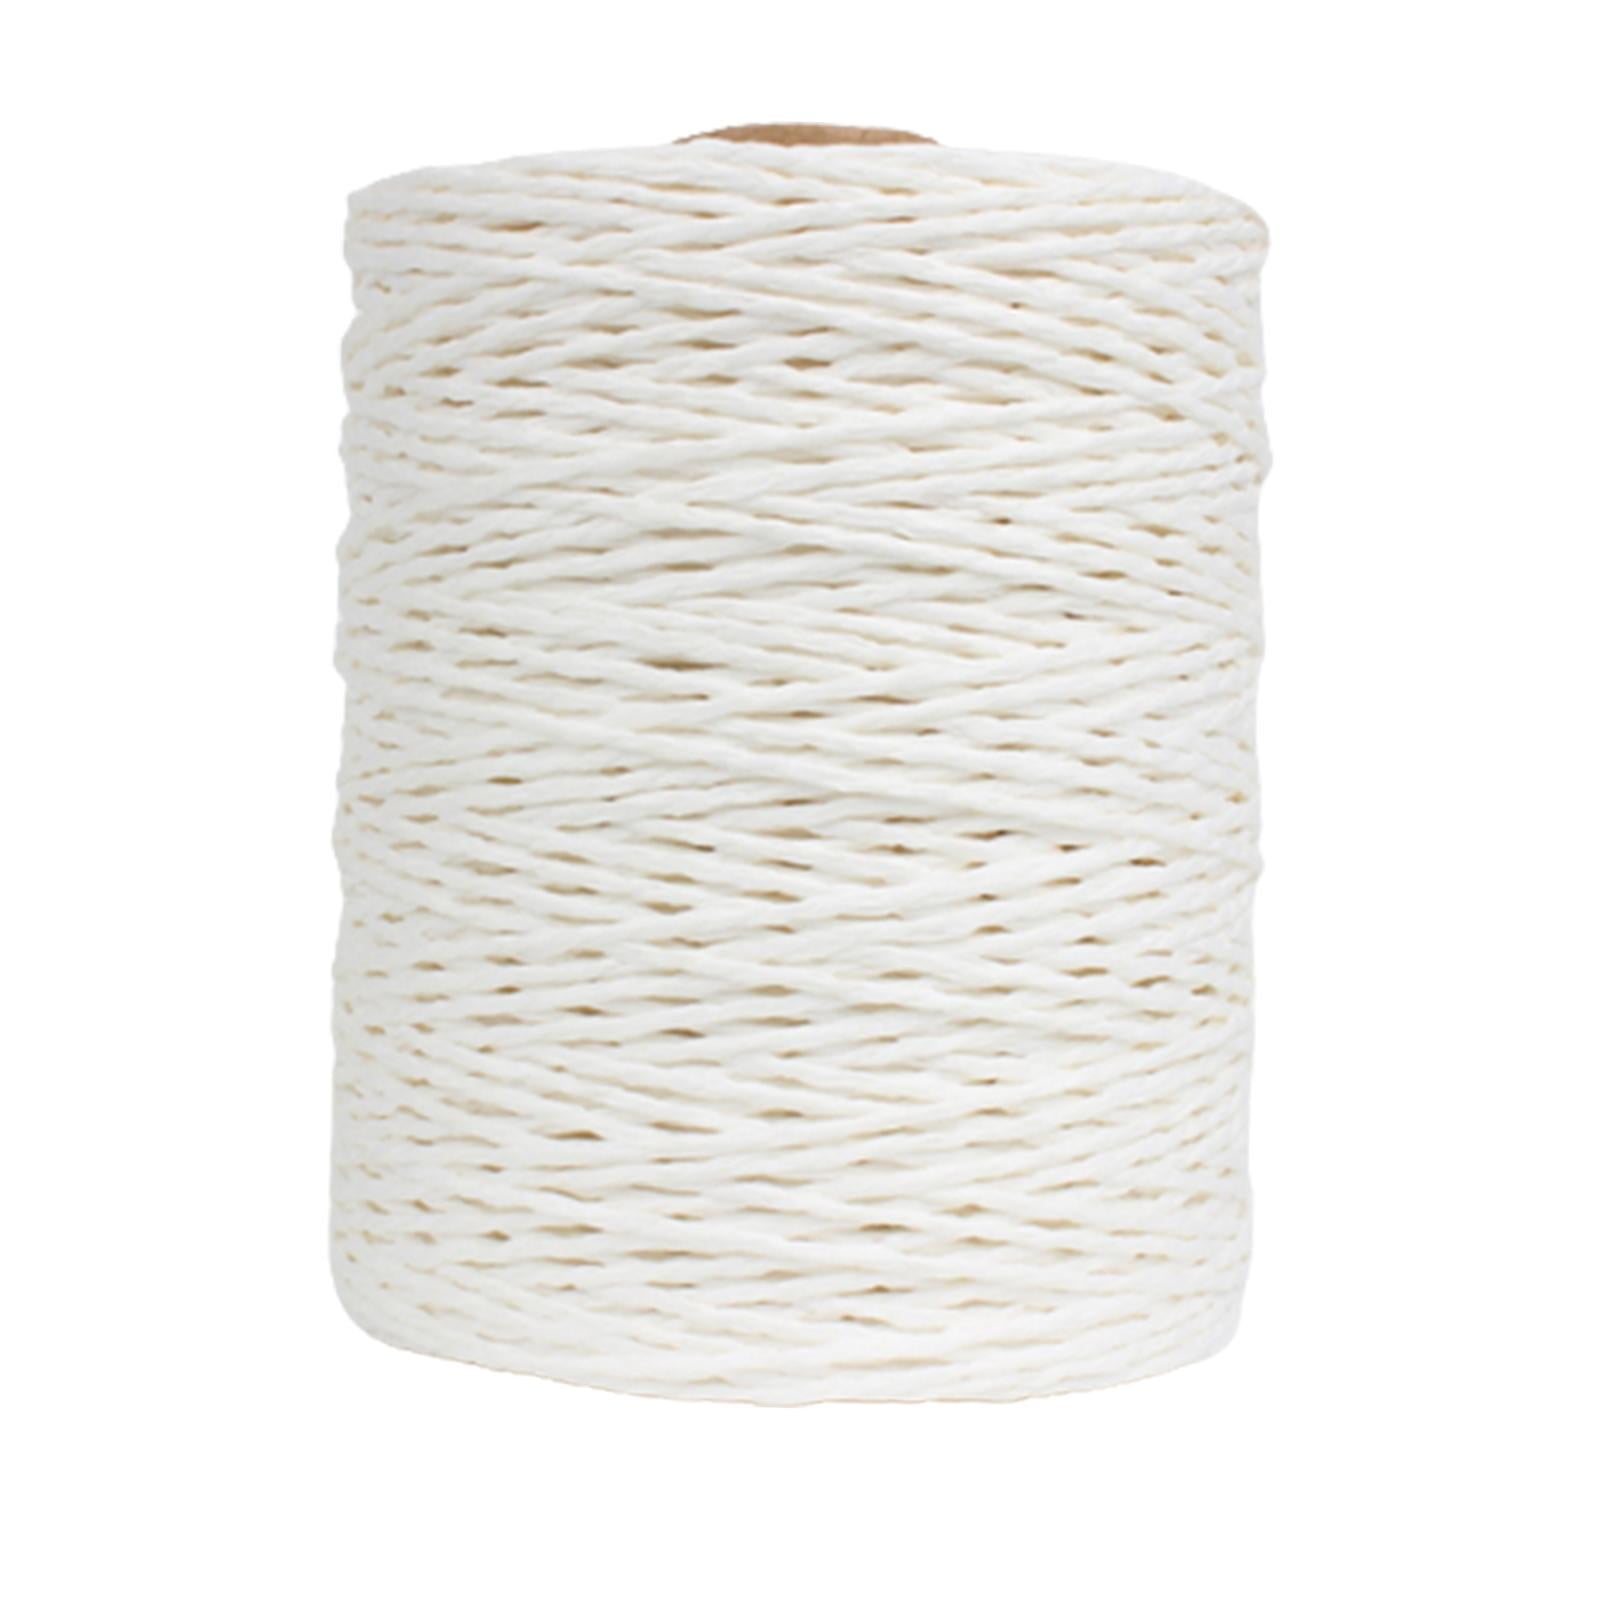 Wholesale Biodegradable 20m Paper Raffia Rope Twine String for Christmas  Valentine's Day Party Gifts Wrapping Ribbon - China Baslcet Grass, Paper  Raffia